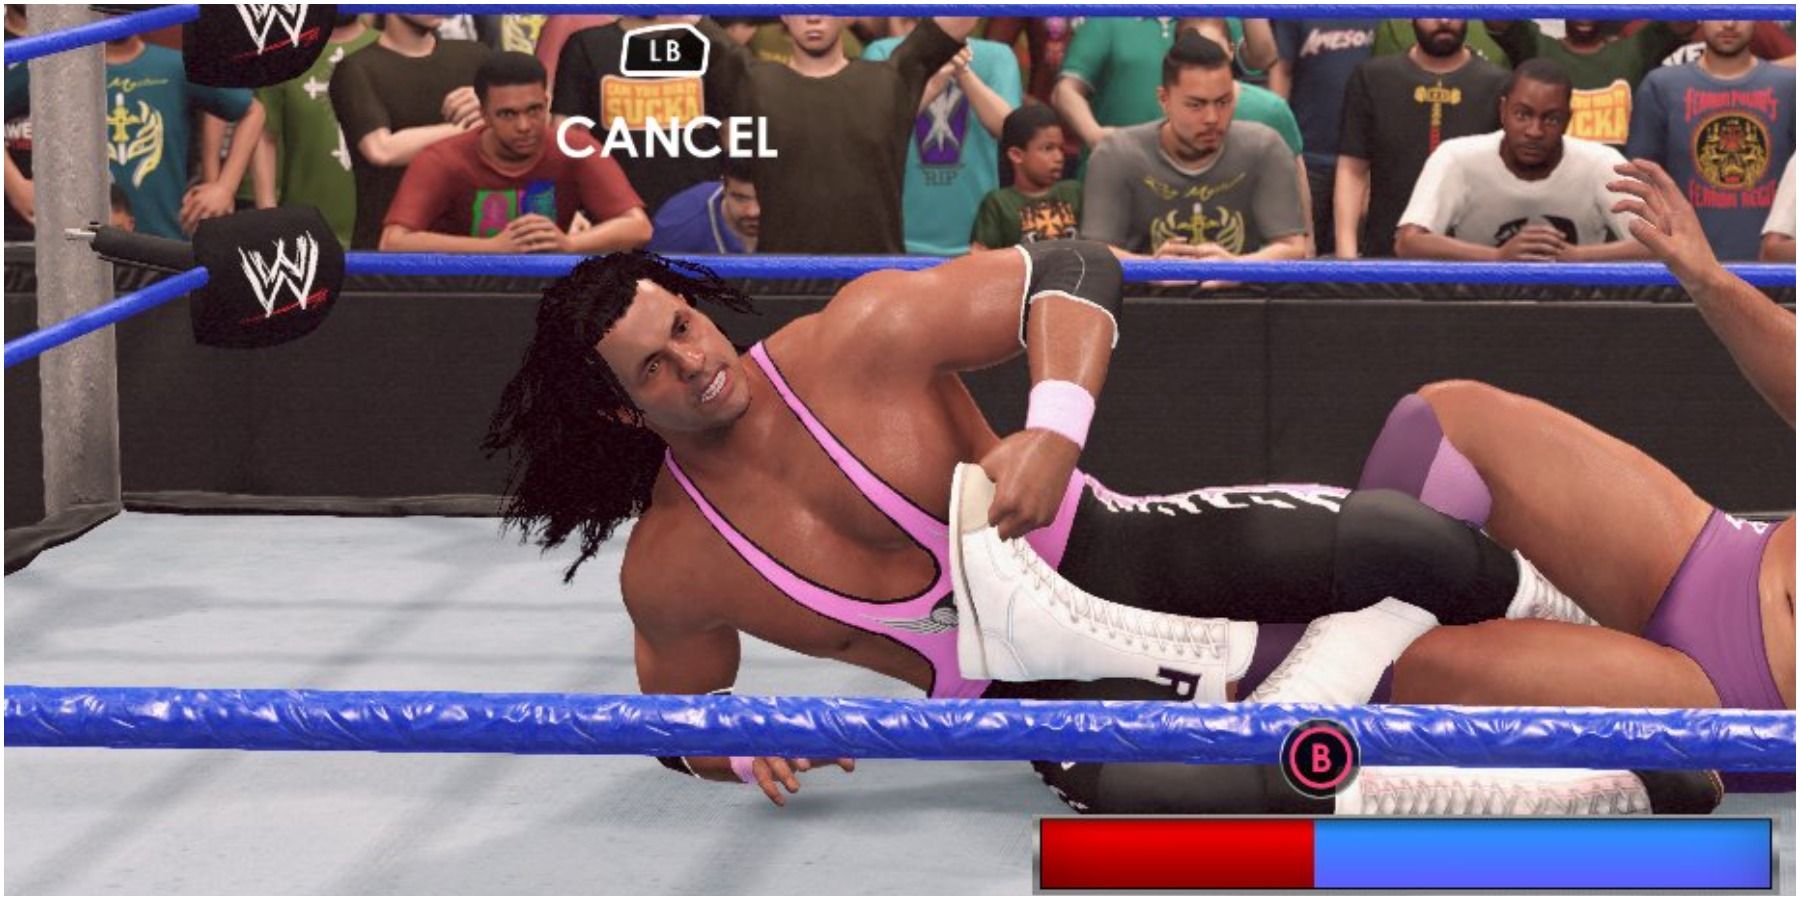 WWE 2K22 cancel submission prompt